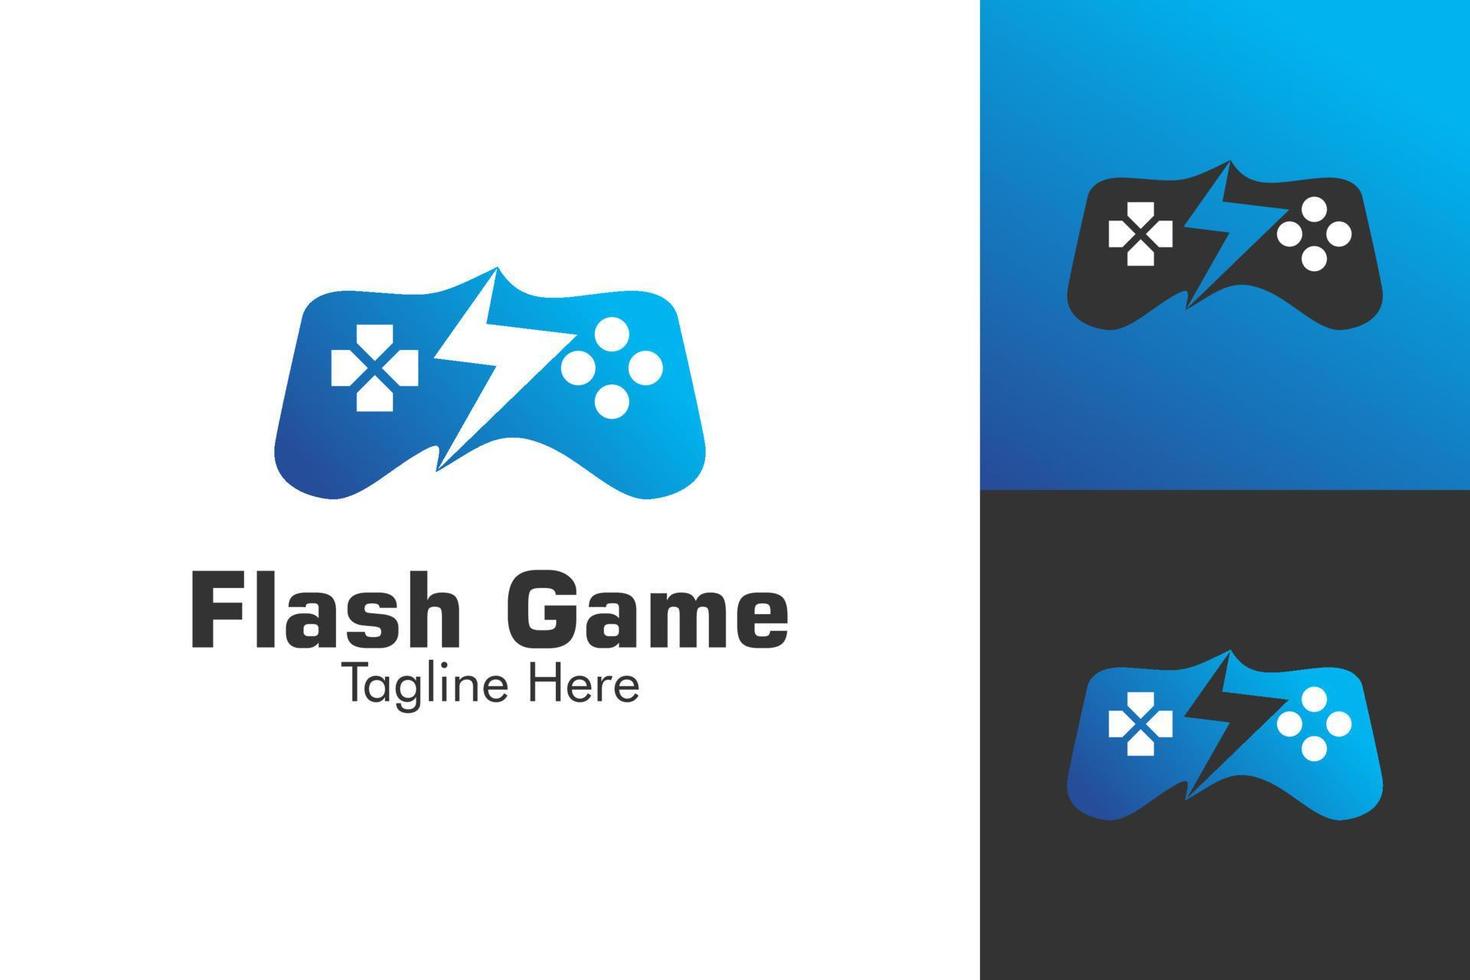 Illustration Vector Graphic of Flash Game Logo. Perfect to use for Technology Company